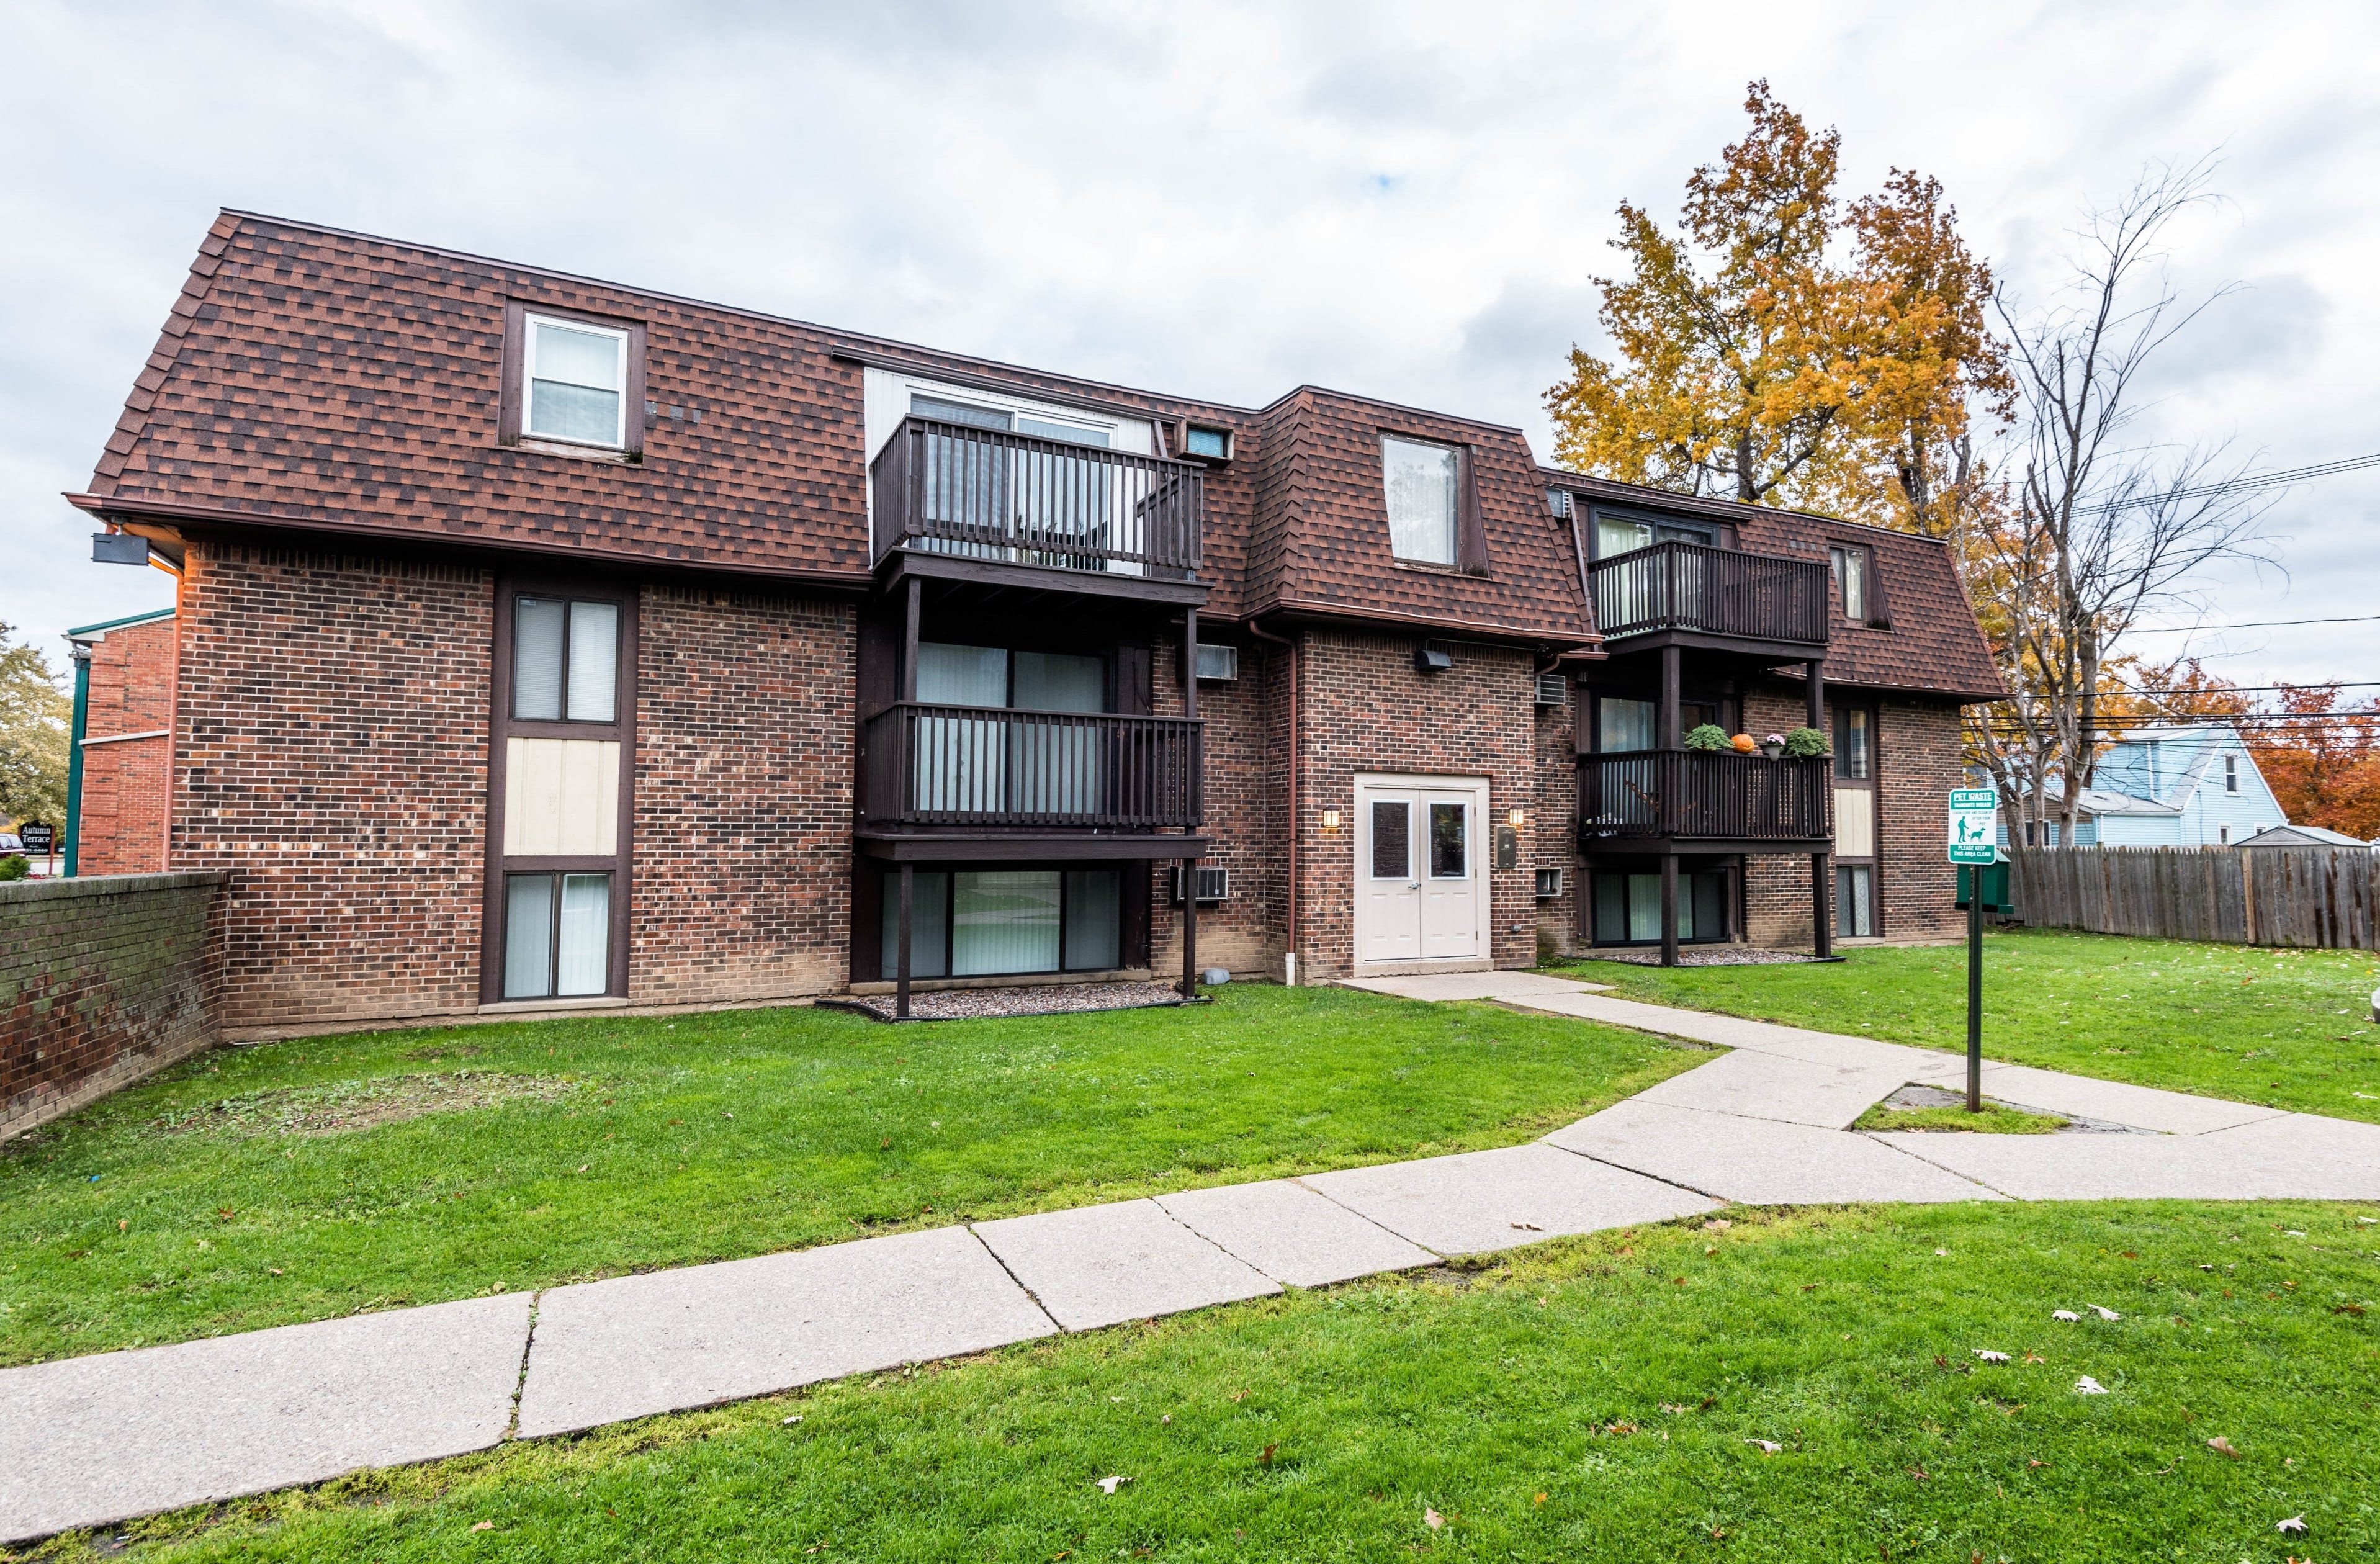 Sheridan Drive - One-bedroom, One-Bath Units - Two-bedroom, One-Bath Units – Tonawanda, NY – Kenmore-Tonawanda School District – Appliances Included – Pet Friendly